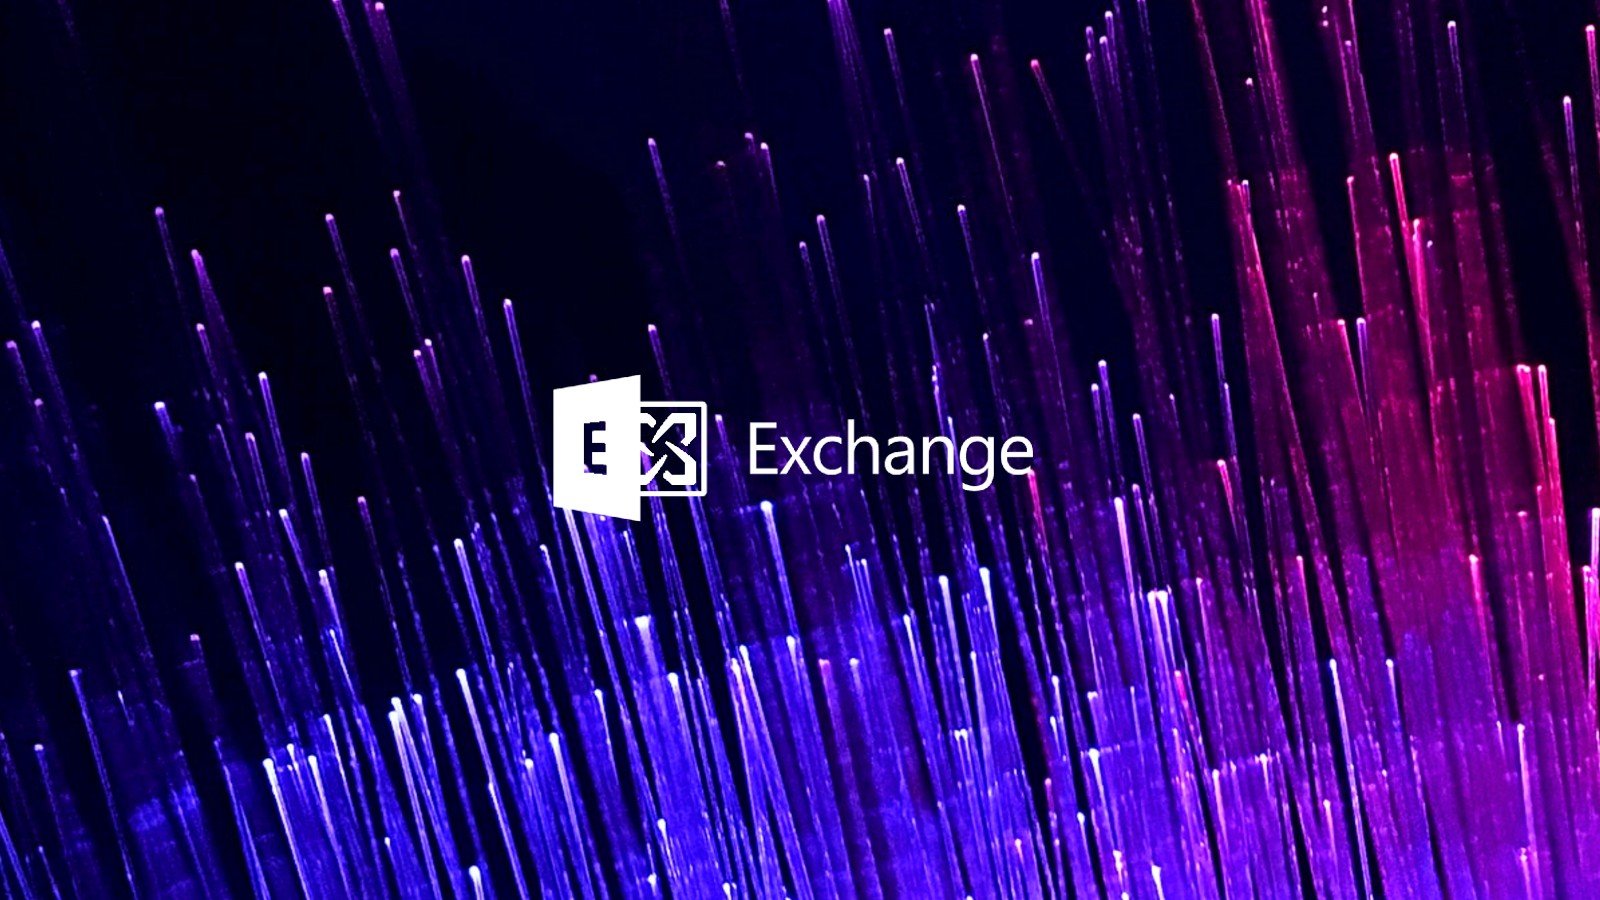 Microsoft: Exchange Server 2013 reaches end of support in 90 days